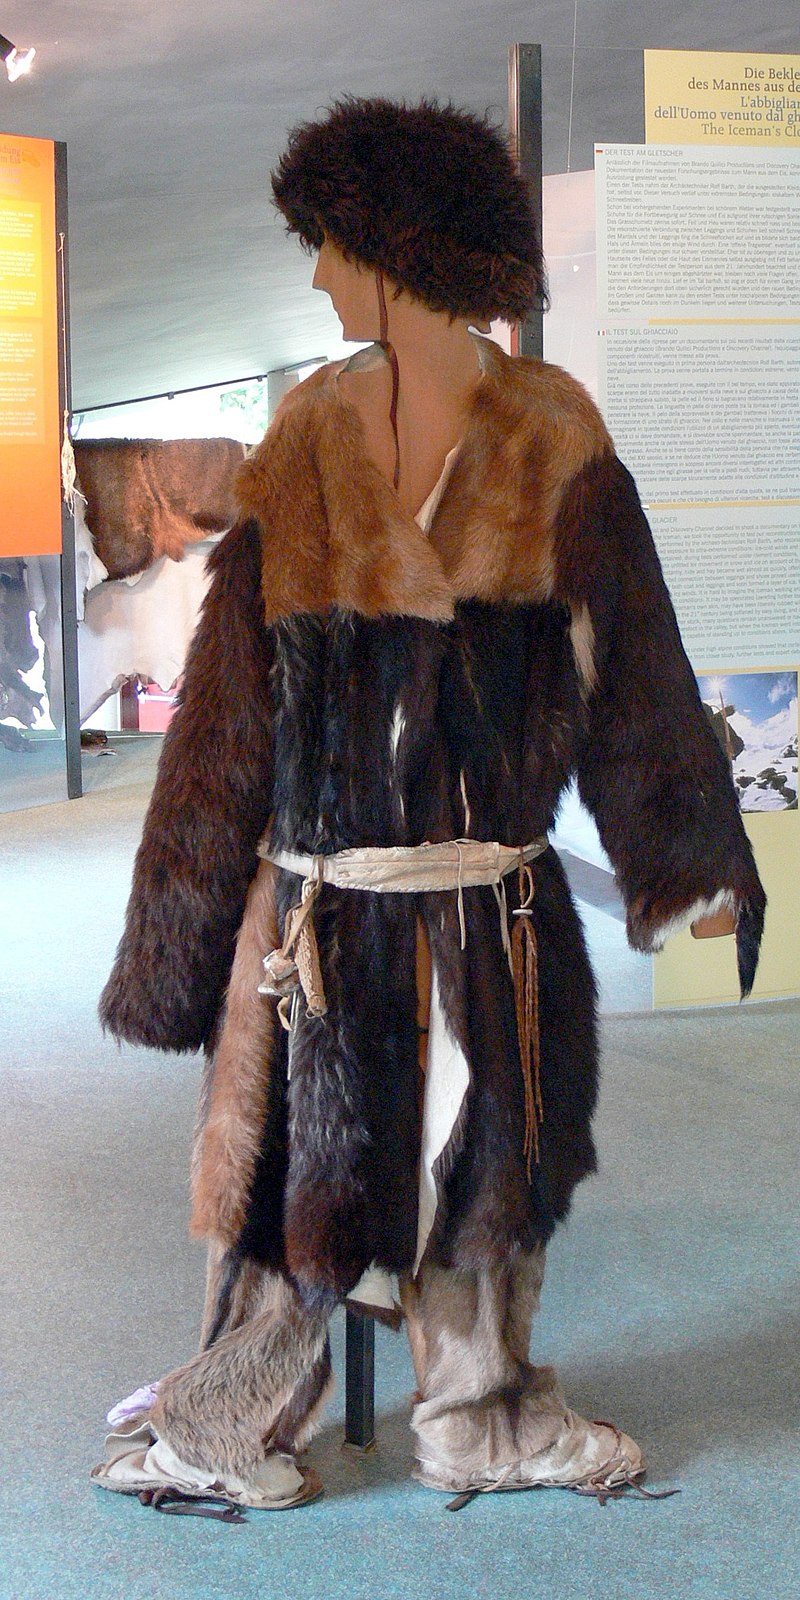 An image of a mannequin wearing a reconstruction of the garments worn by Ötzi the ice man